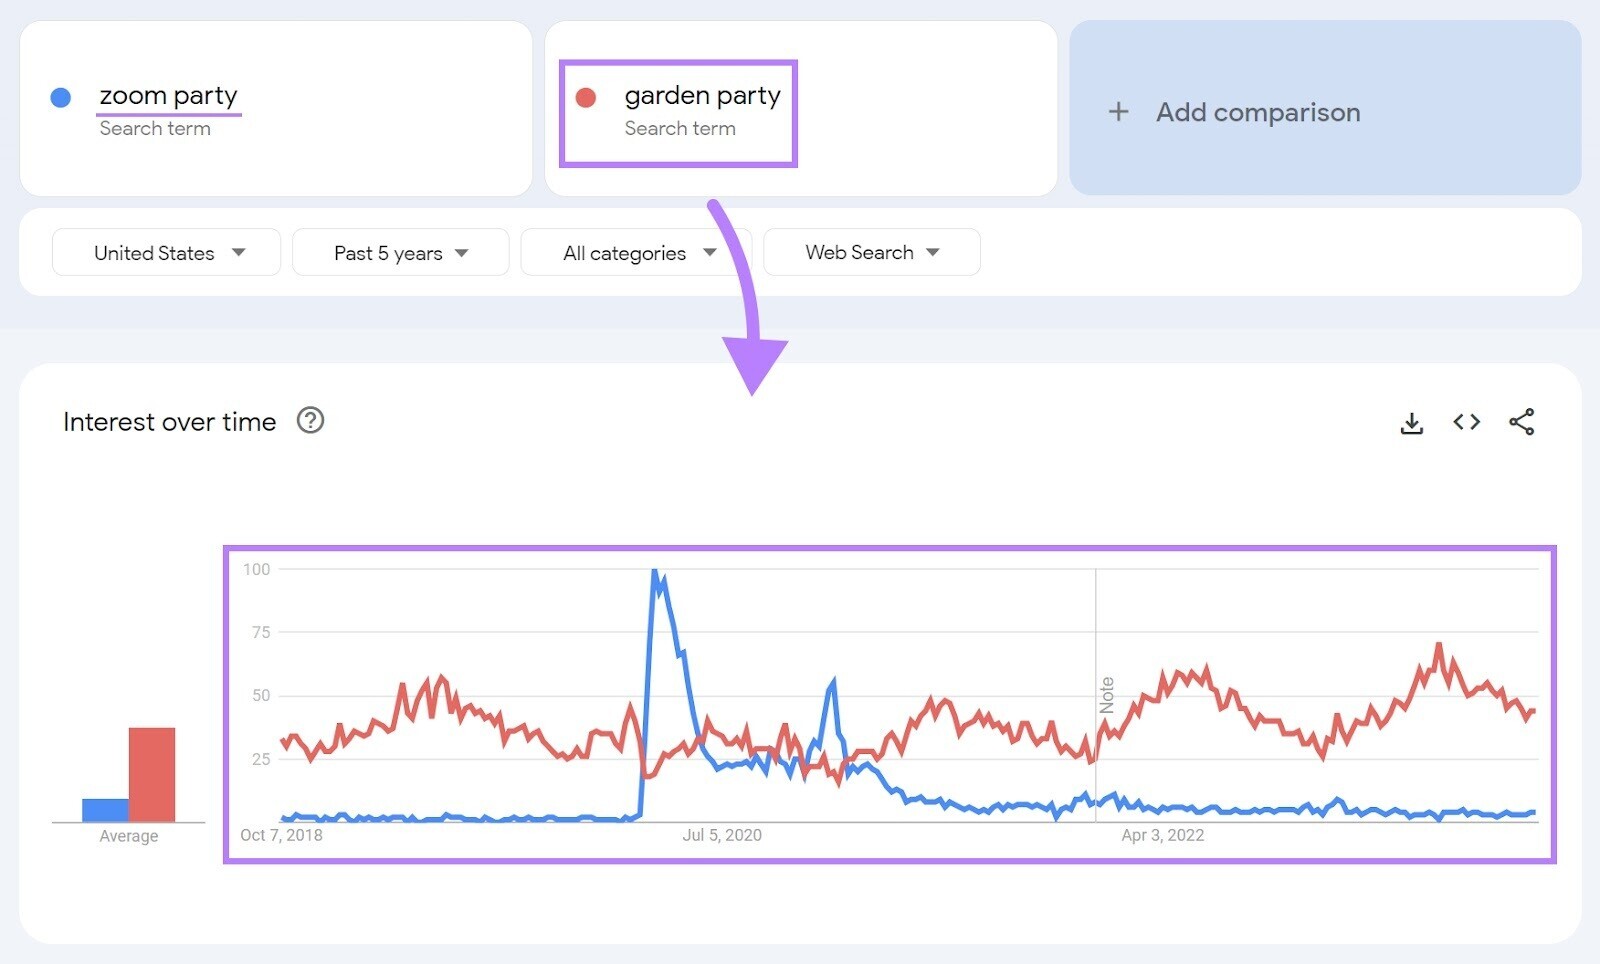 Interest over time graph showing results for “zoom party” and “garden party”